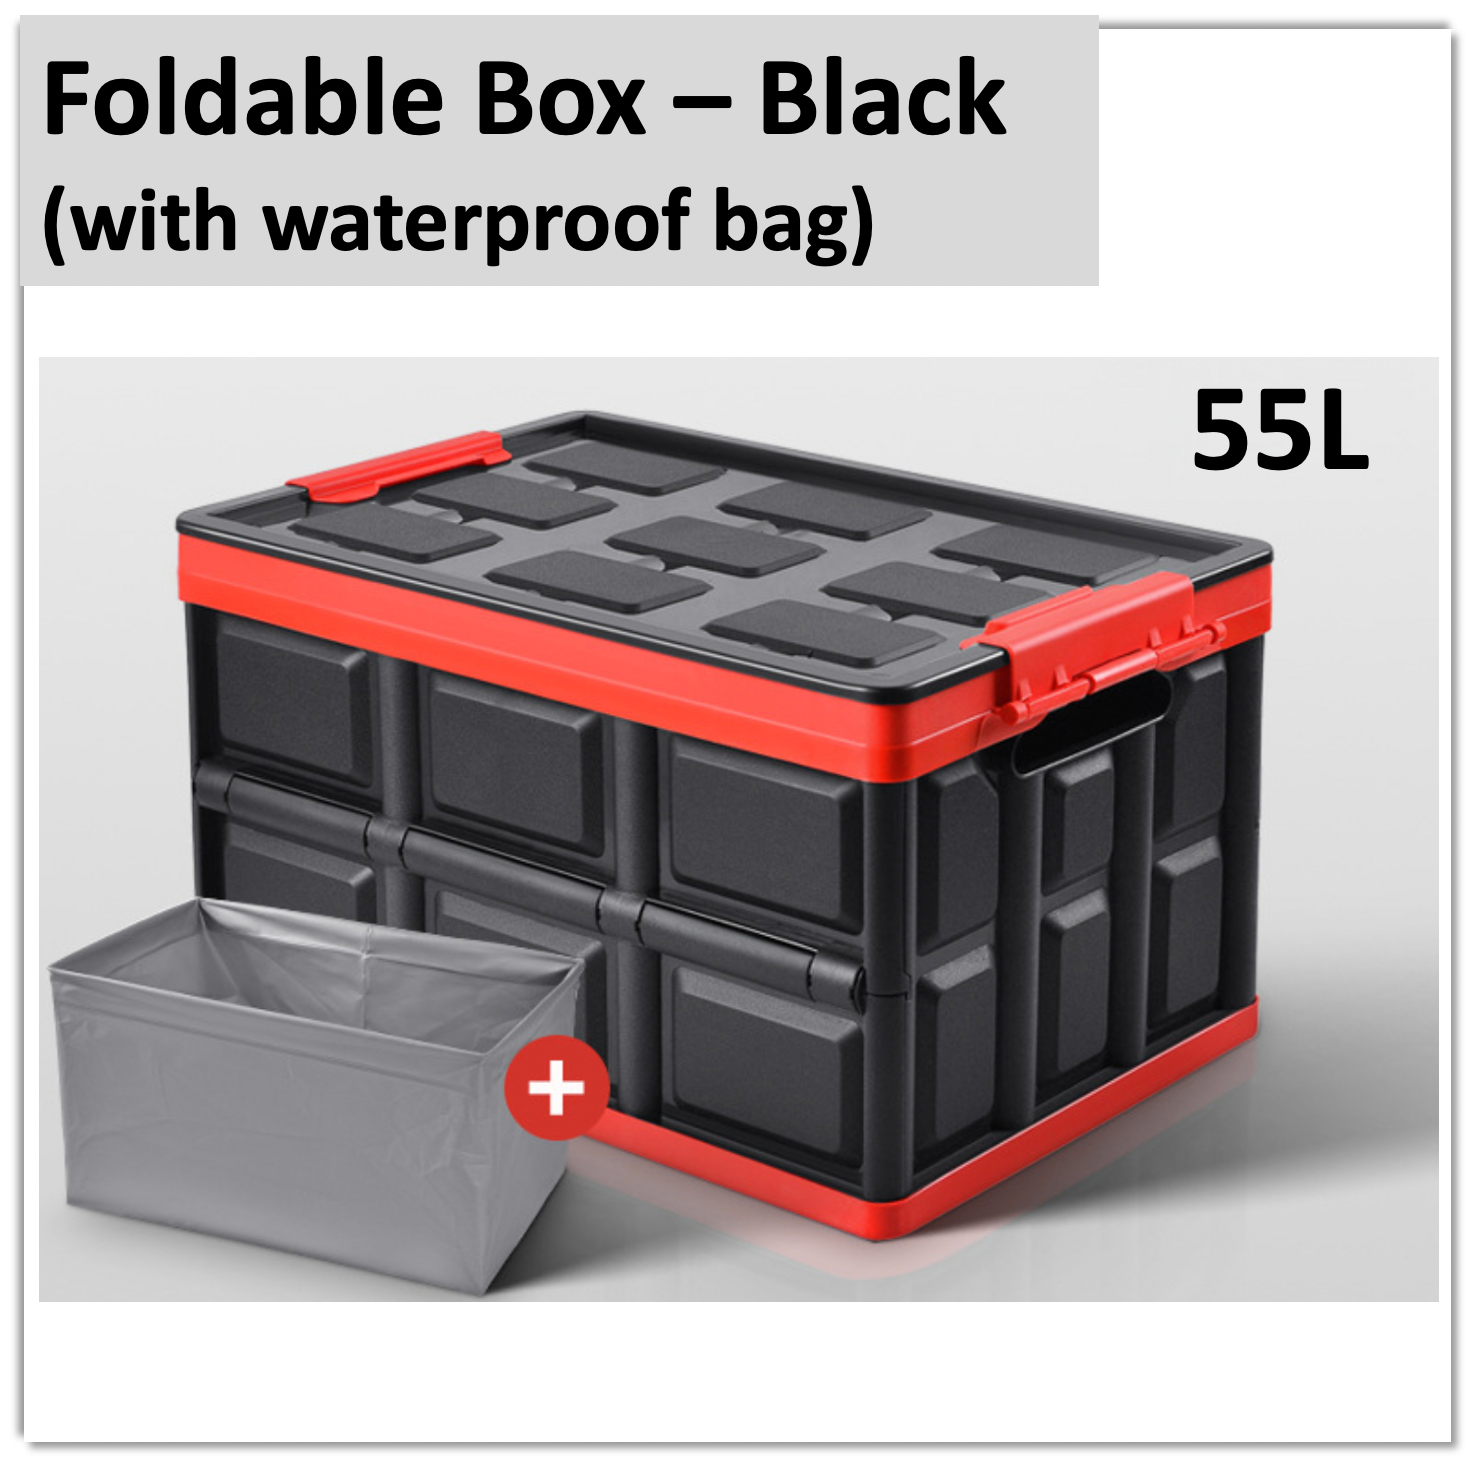 55L】Foldable Plastic Boxes Toy Storage Bins Collapsible Storage Box Car  Boot Organizer Container with Lids Waterproof Bag Large Storage Totes